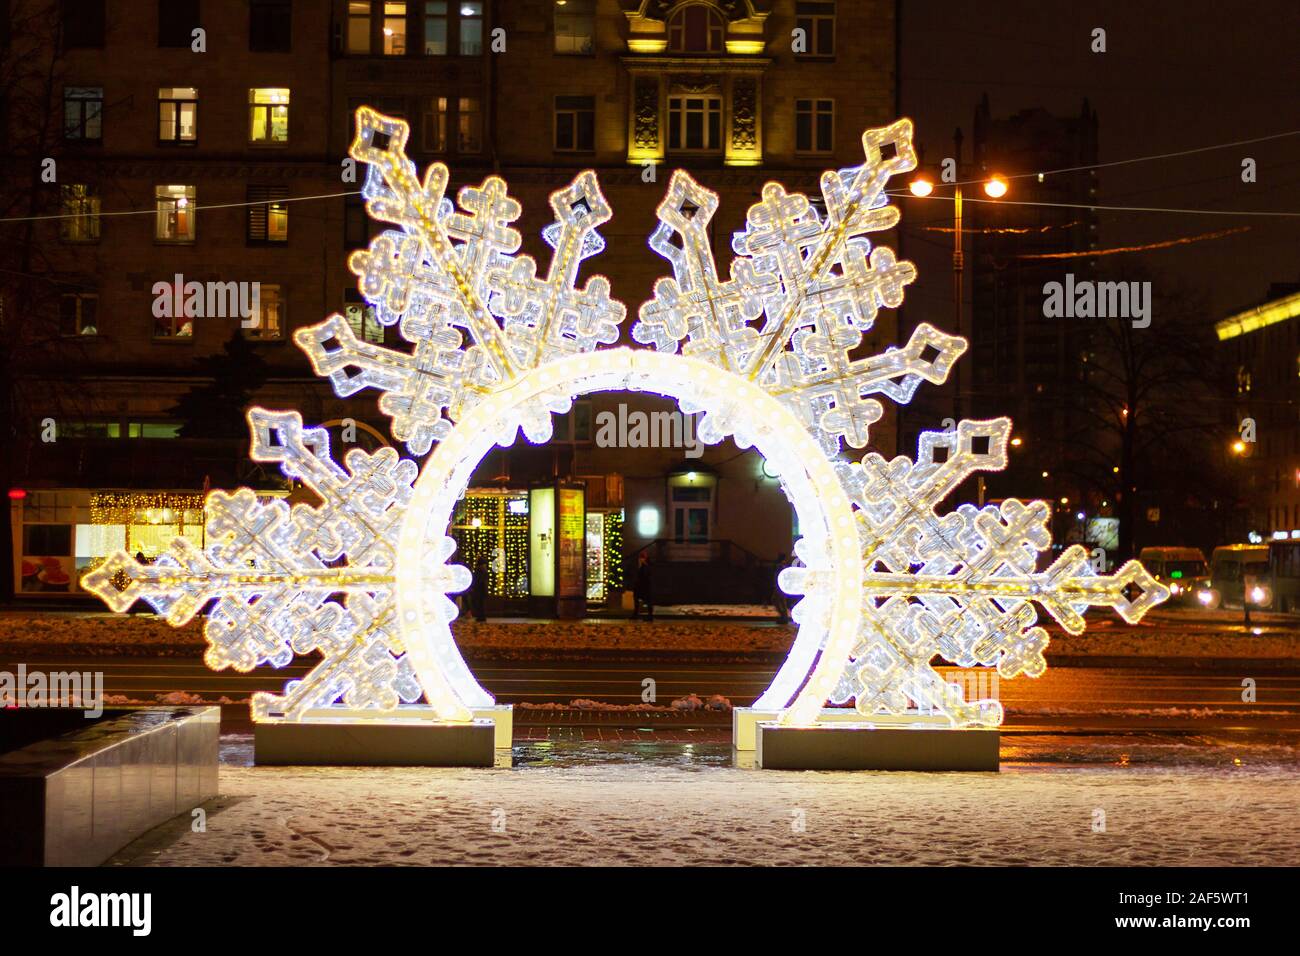 large snowflake decorations illuminated a fabulous atmosphere in the city Stock Photo